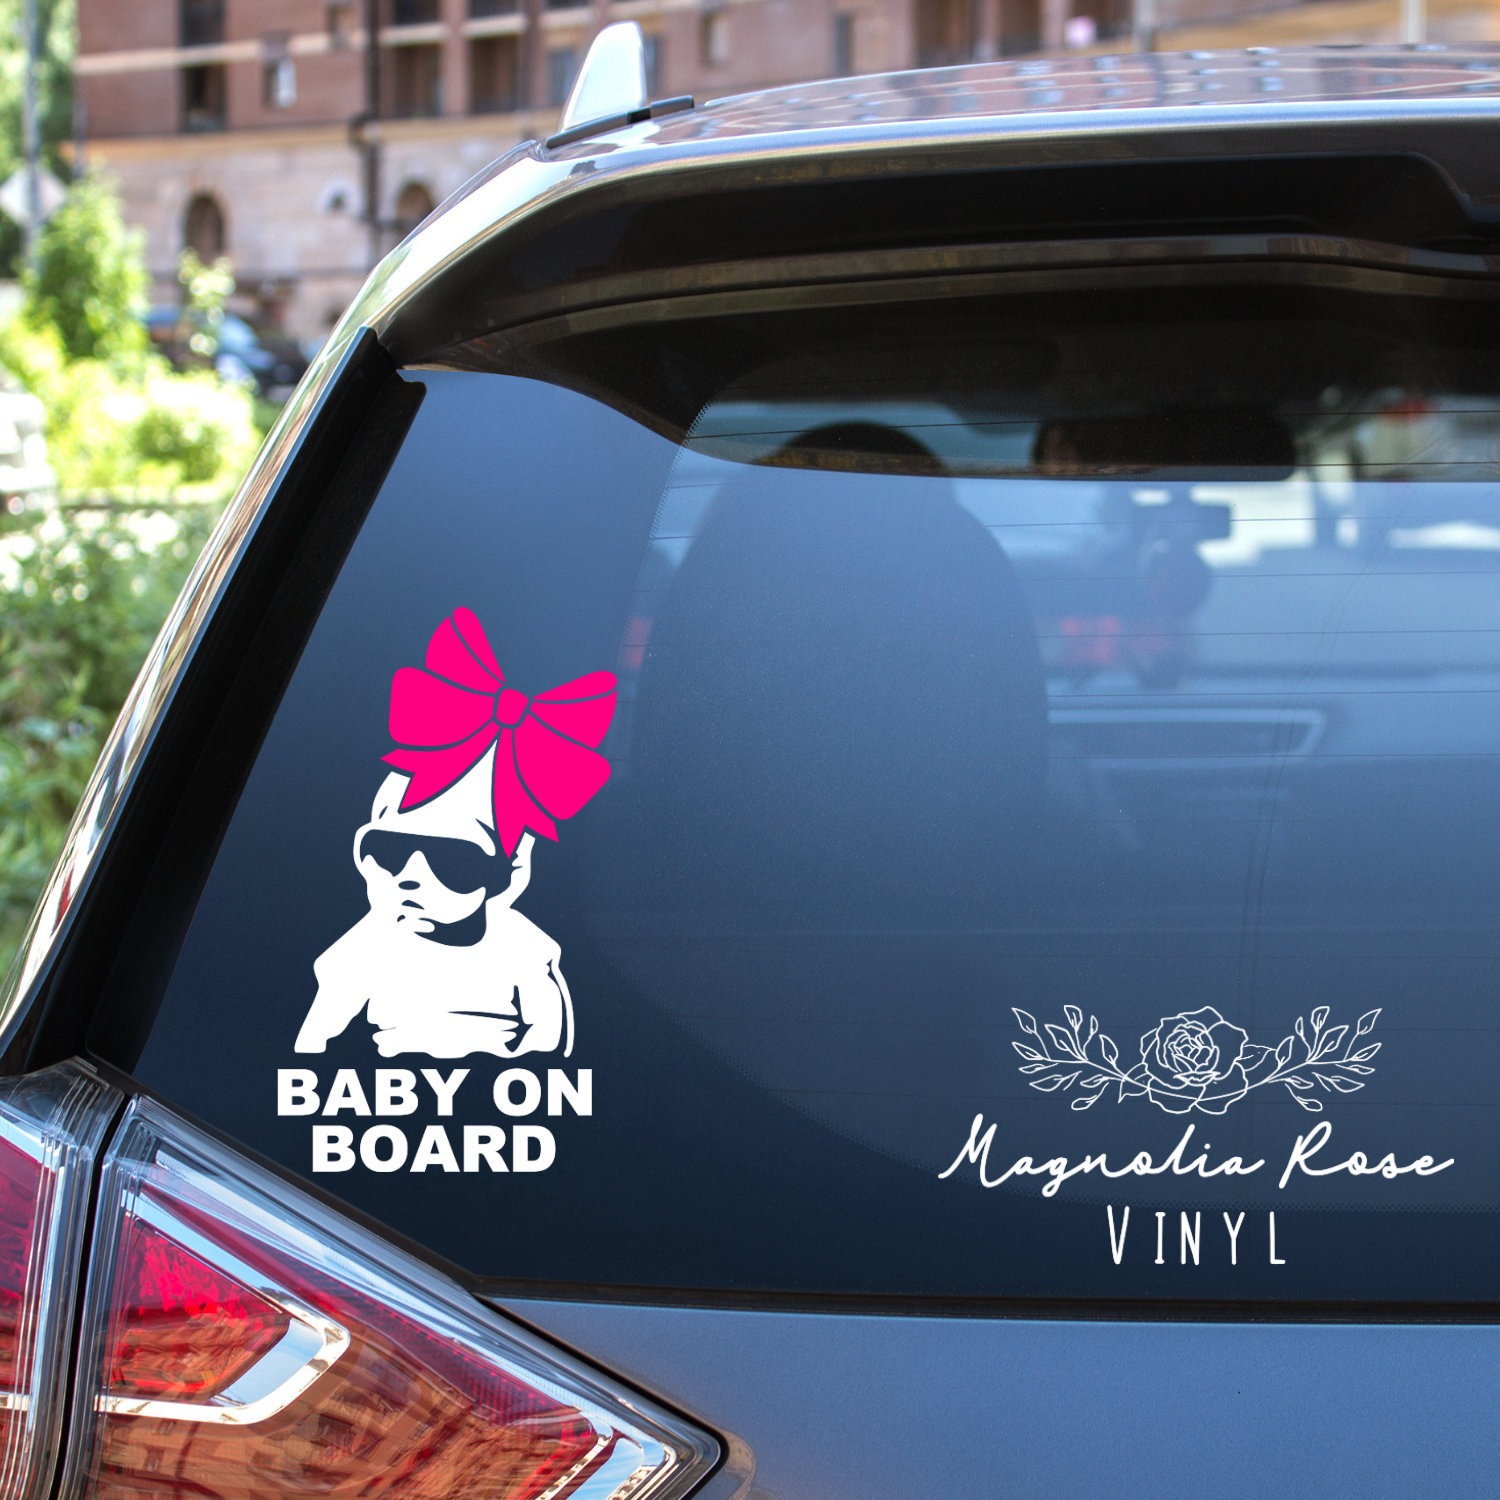 Baby on Board Car Decal - TenStickers